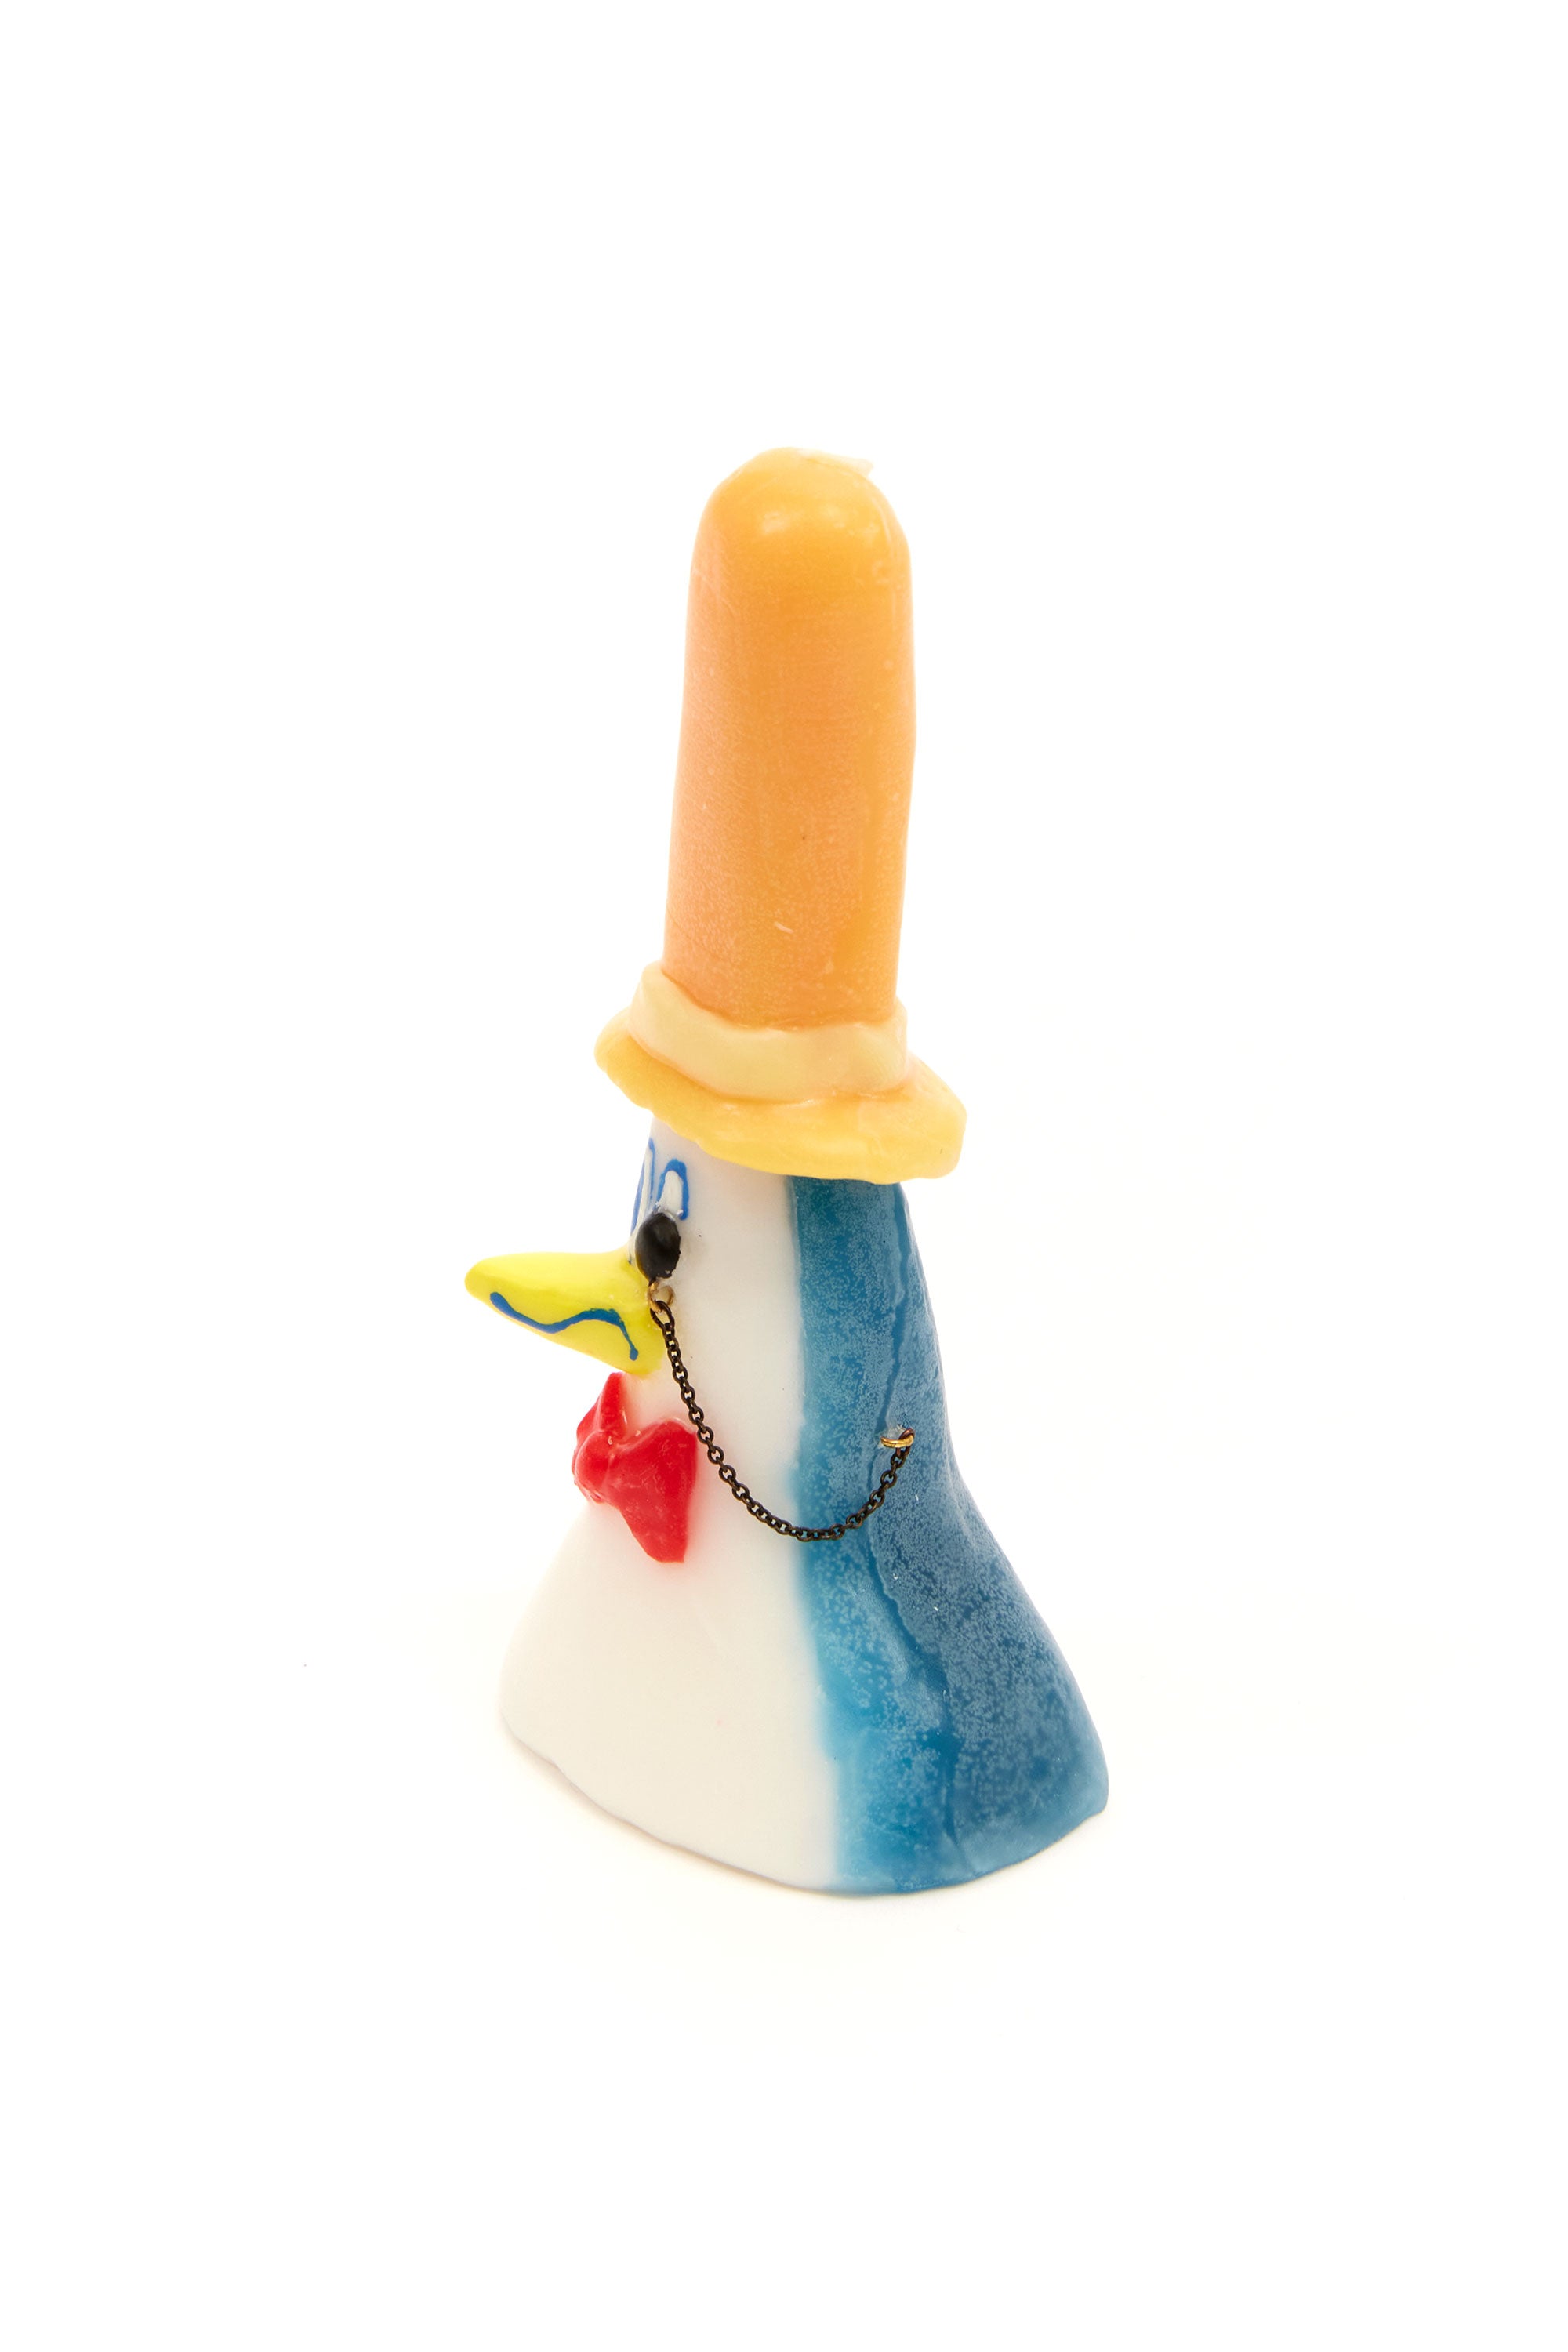 The OLGA GOOSE - FRANK WAX CANDLE  available online with global shipping, and in PAM Stores Melbourne and Sydney.